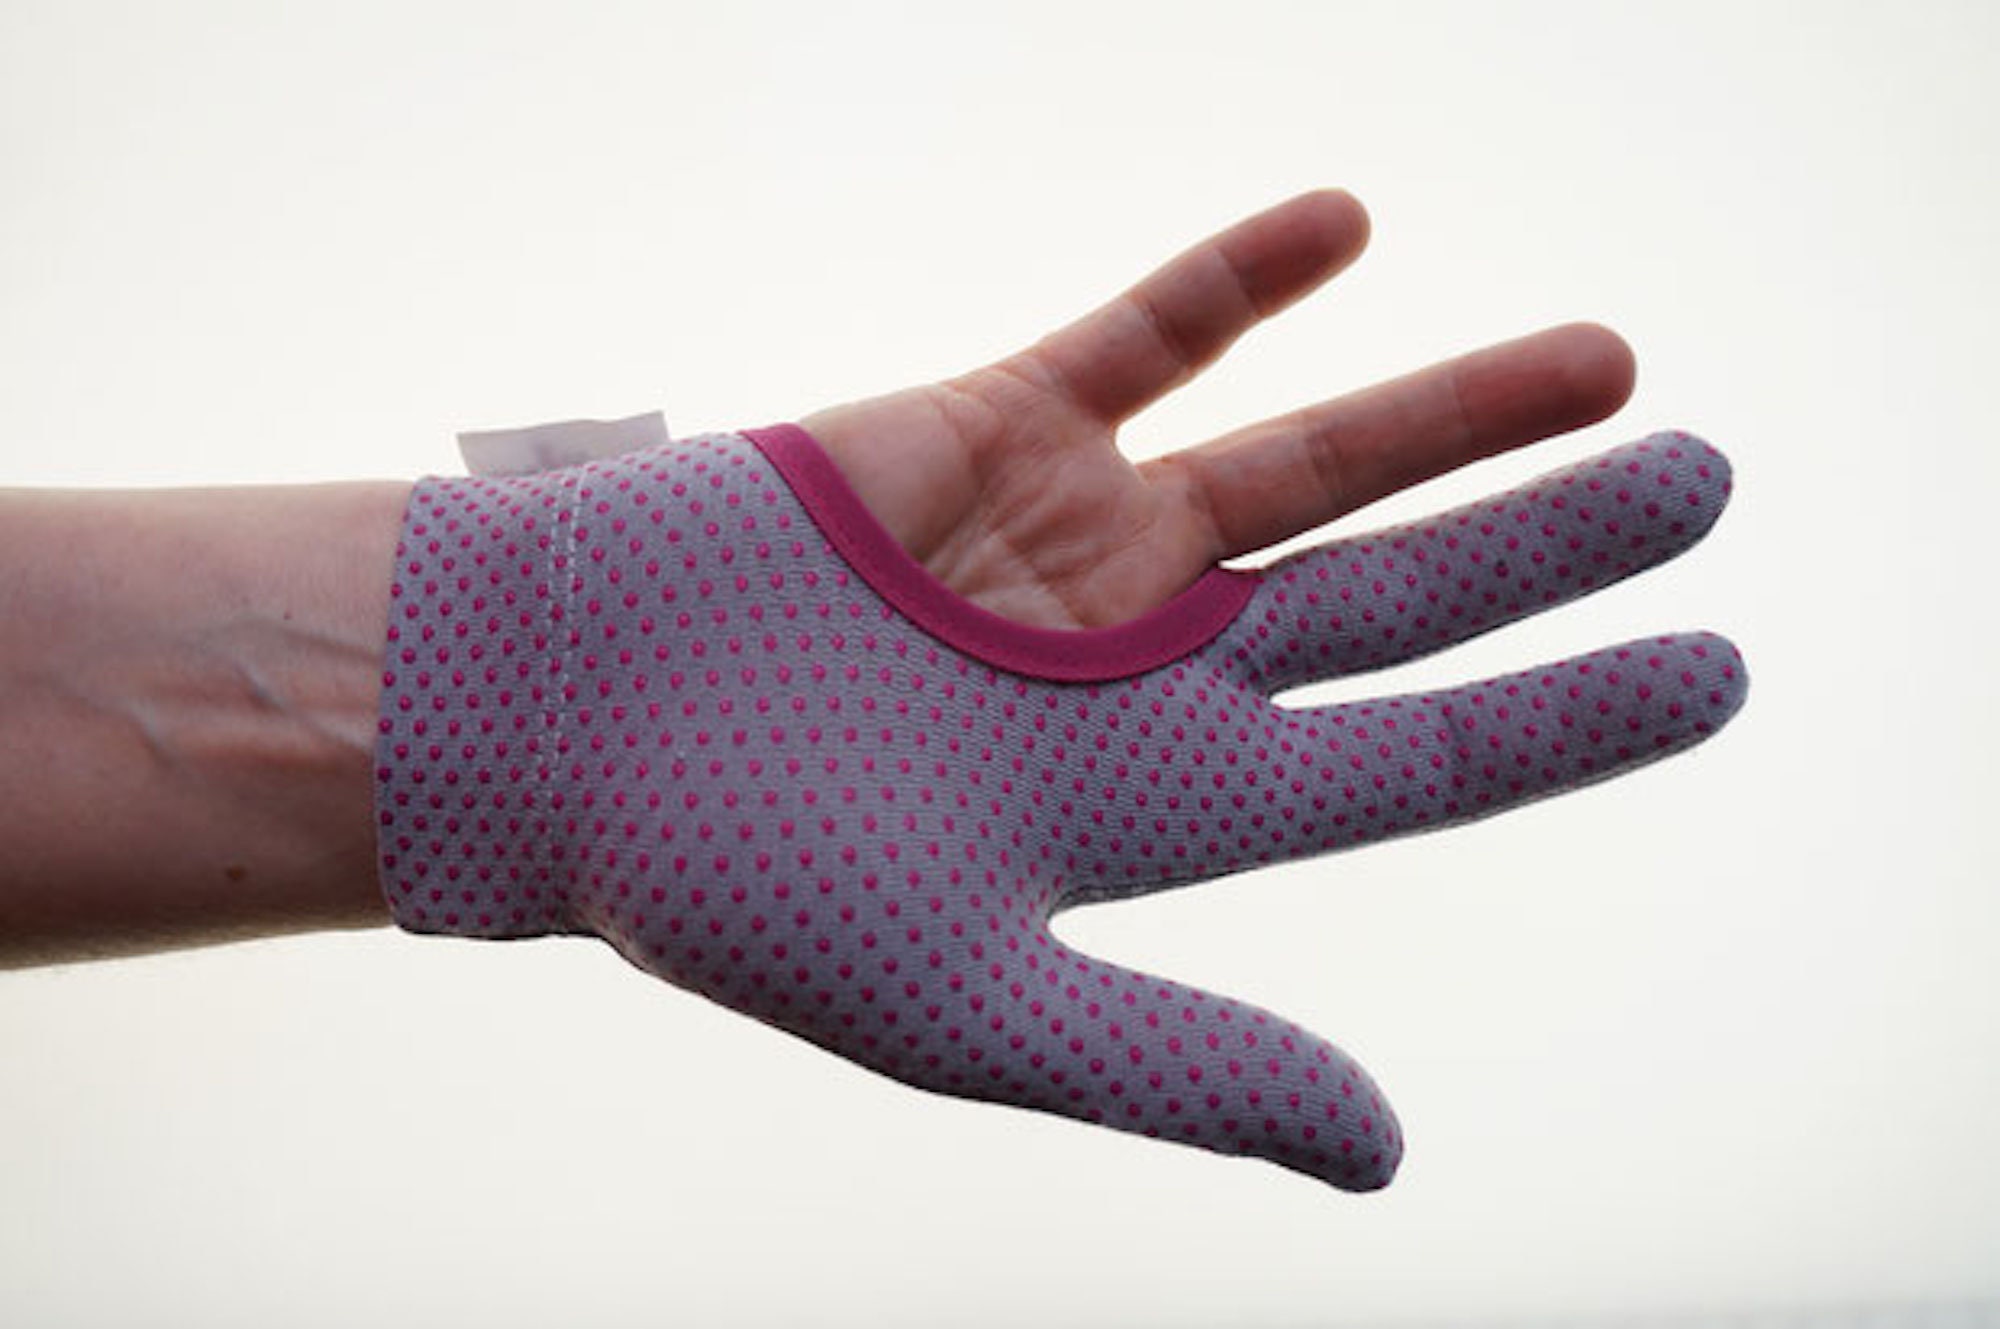 Get a grip on free-motion quilting with Regi's Grip Quilting Gloves 